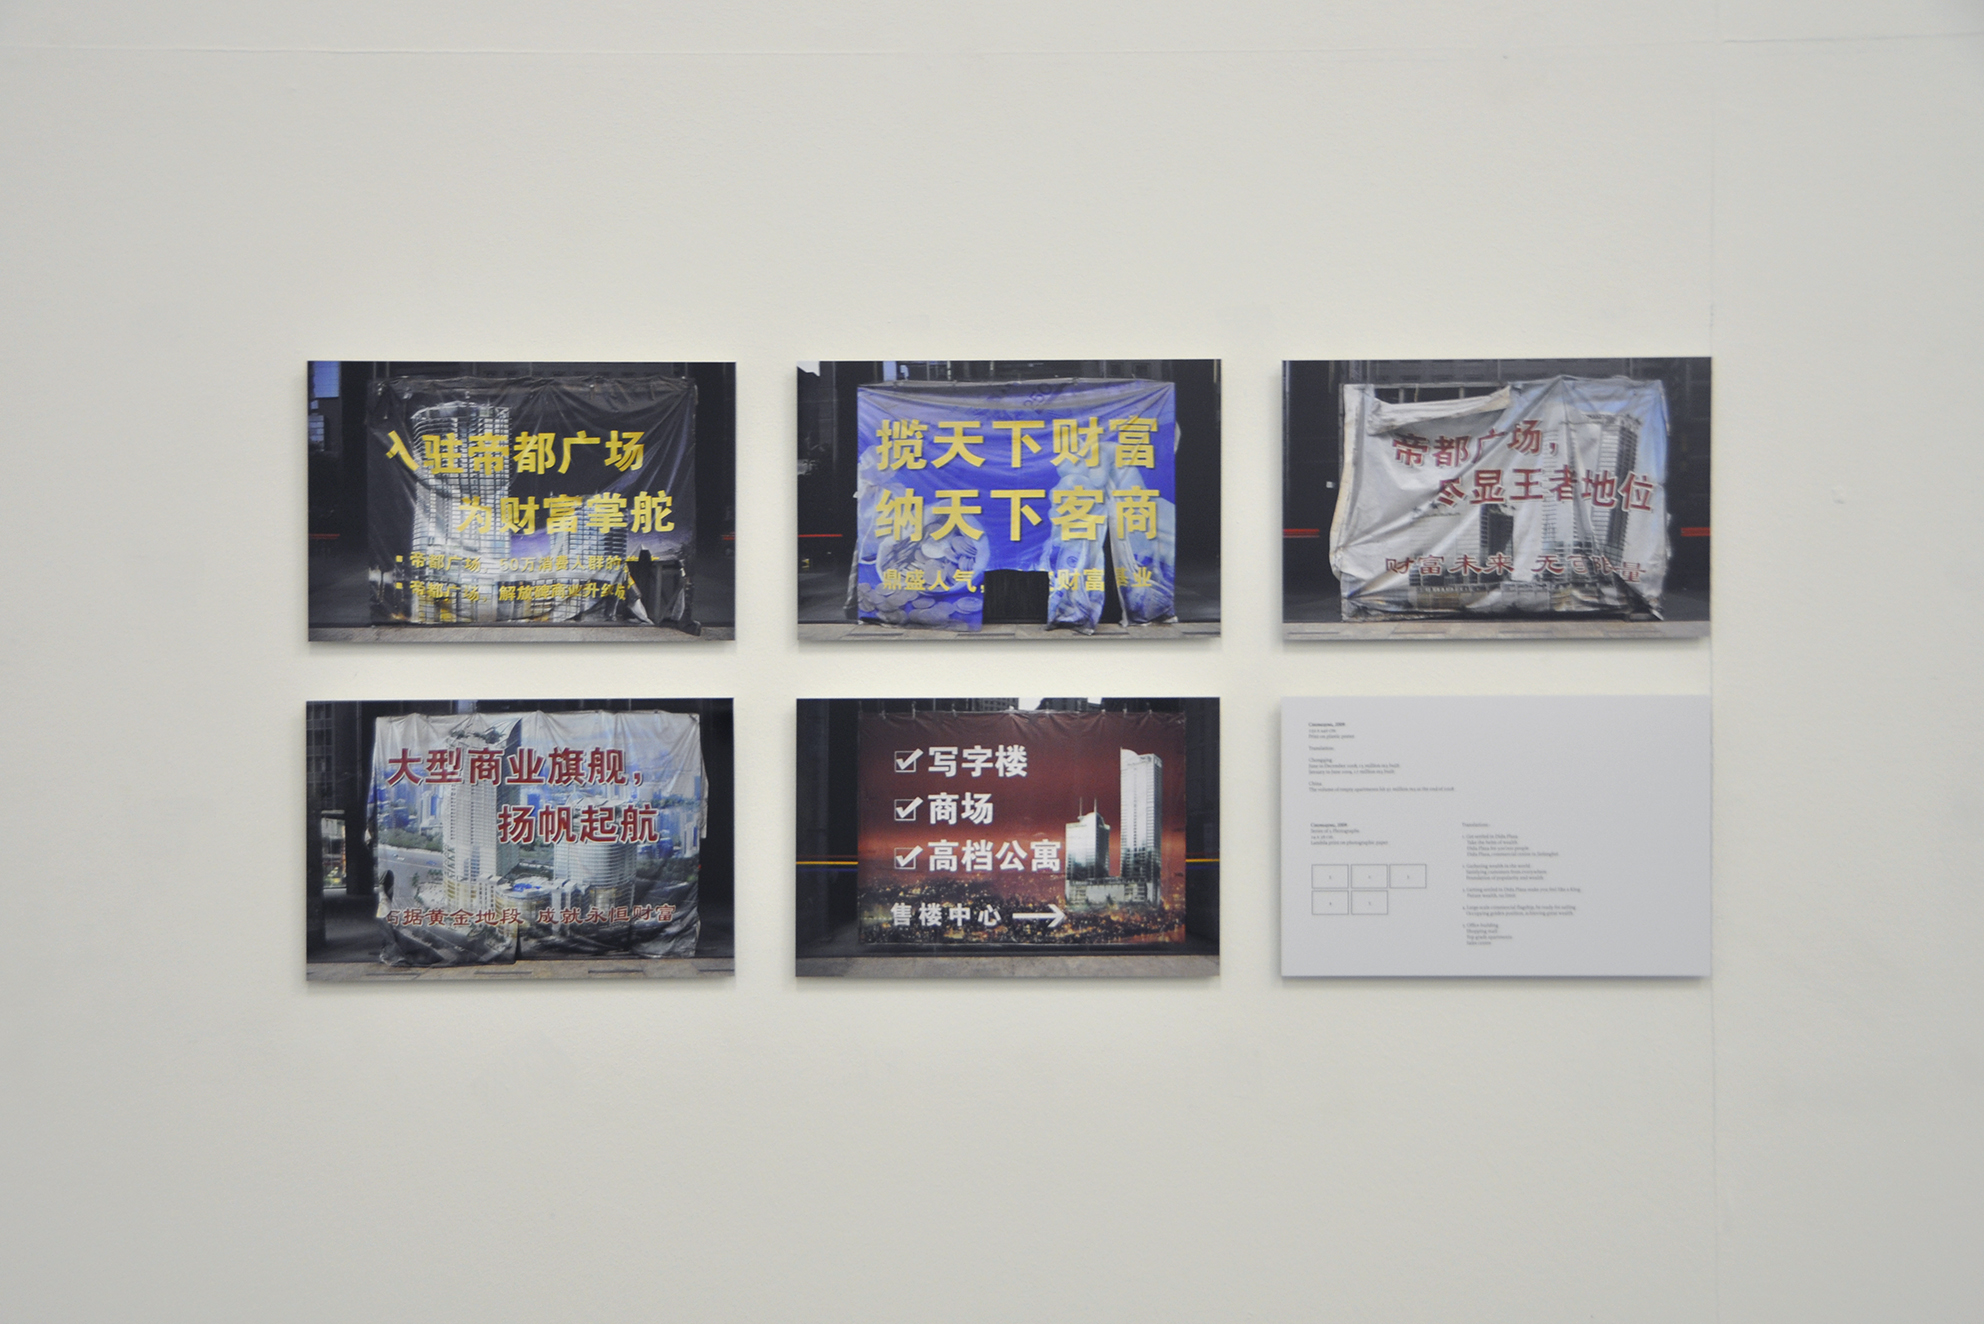 Chongqing, 5 documentary photographs, 24 x 36 cm, 2010, in collaboration with Swann Thommen